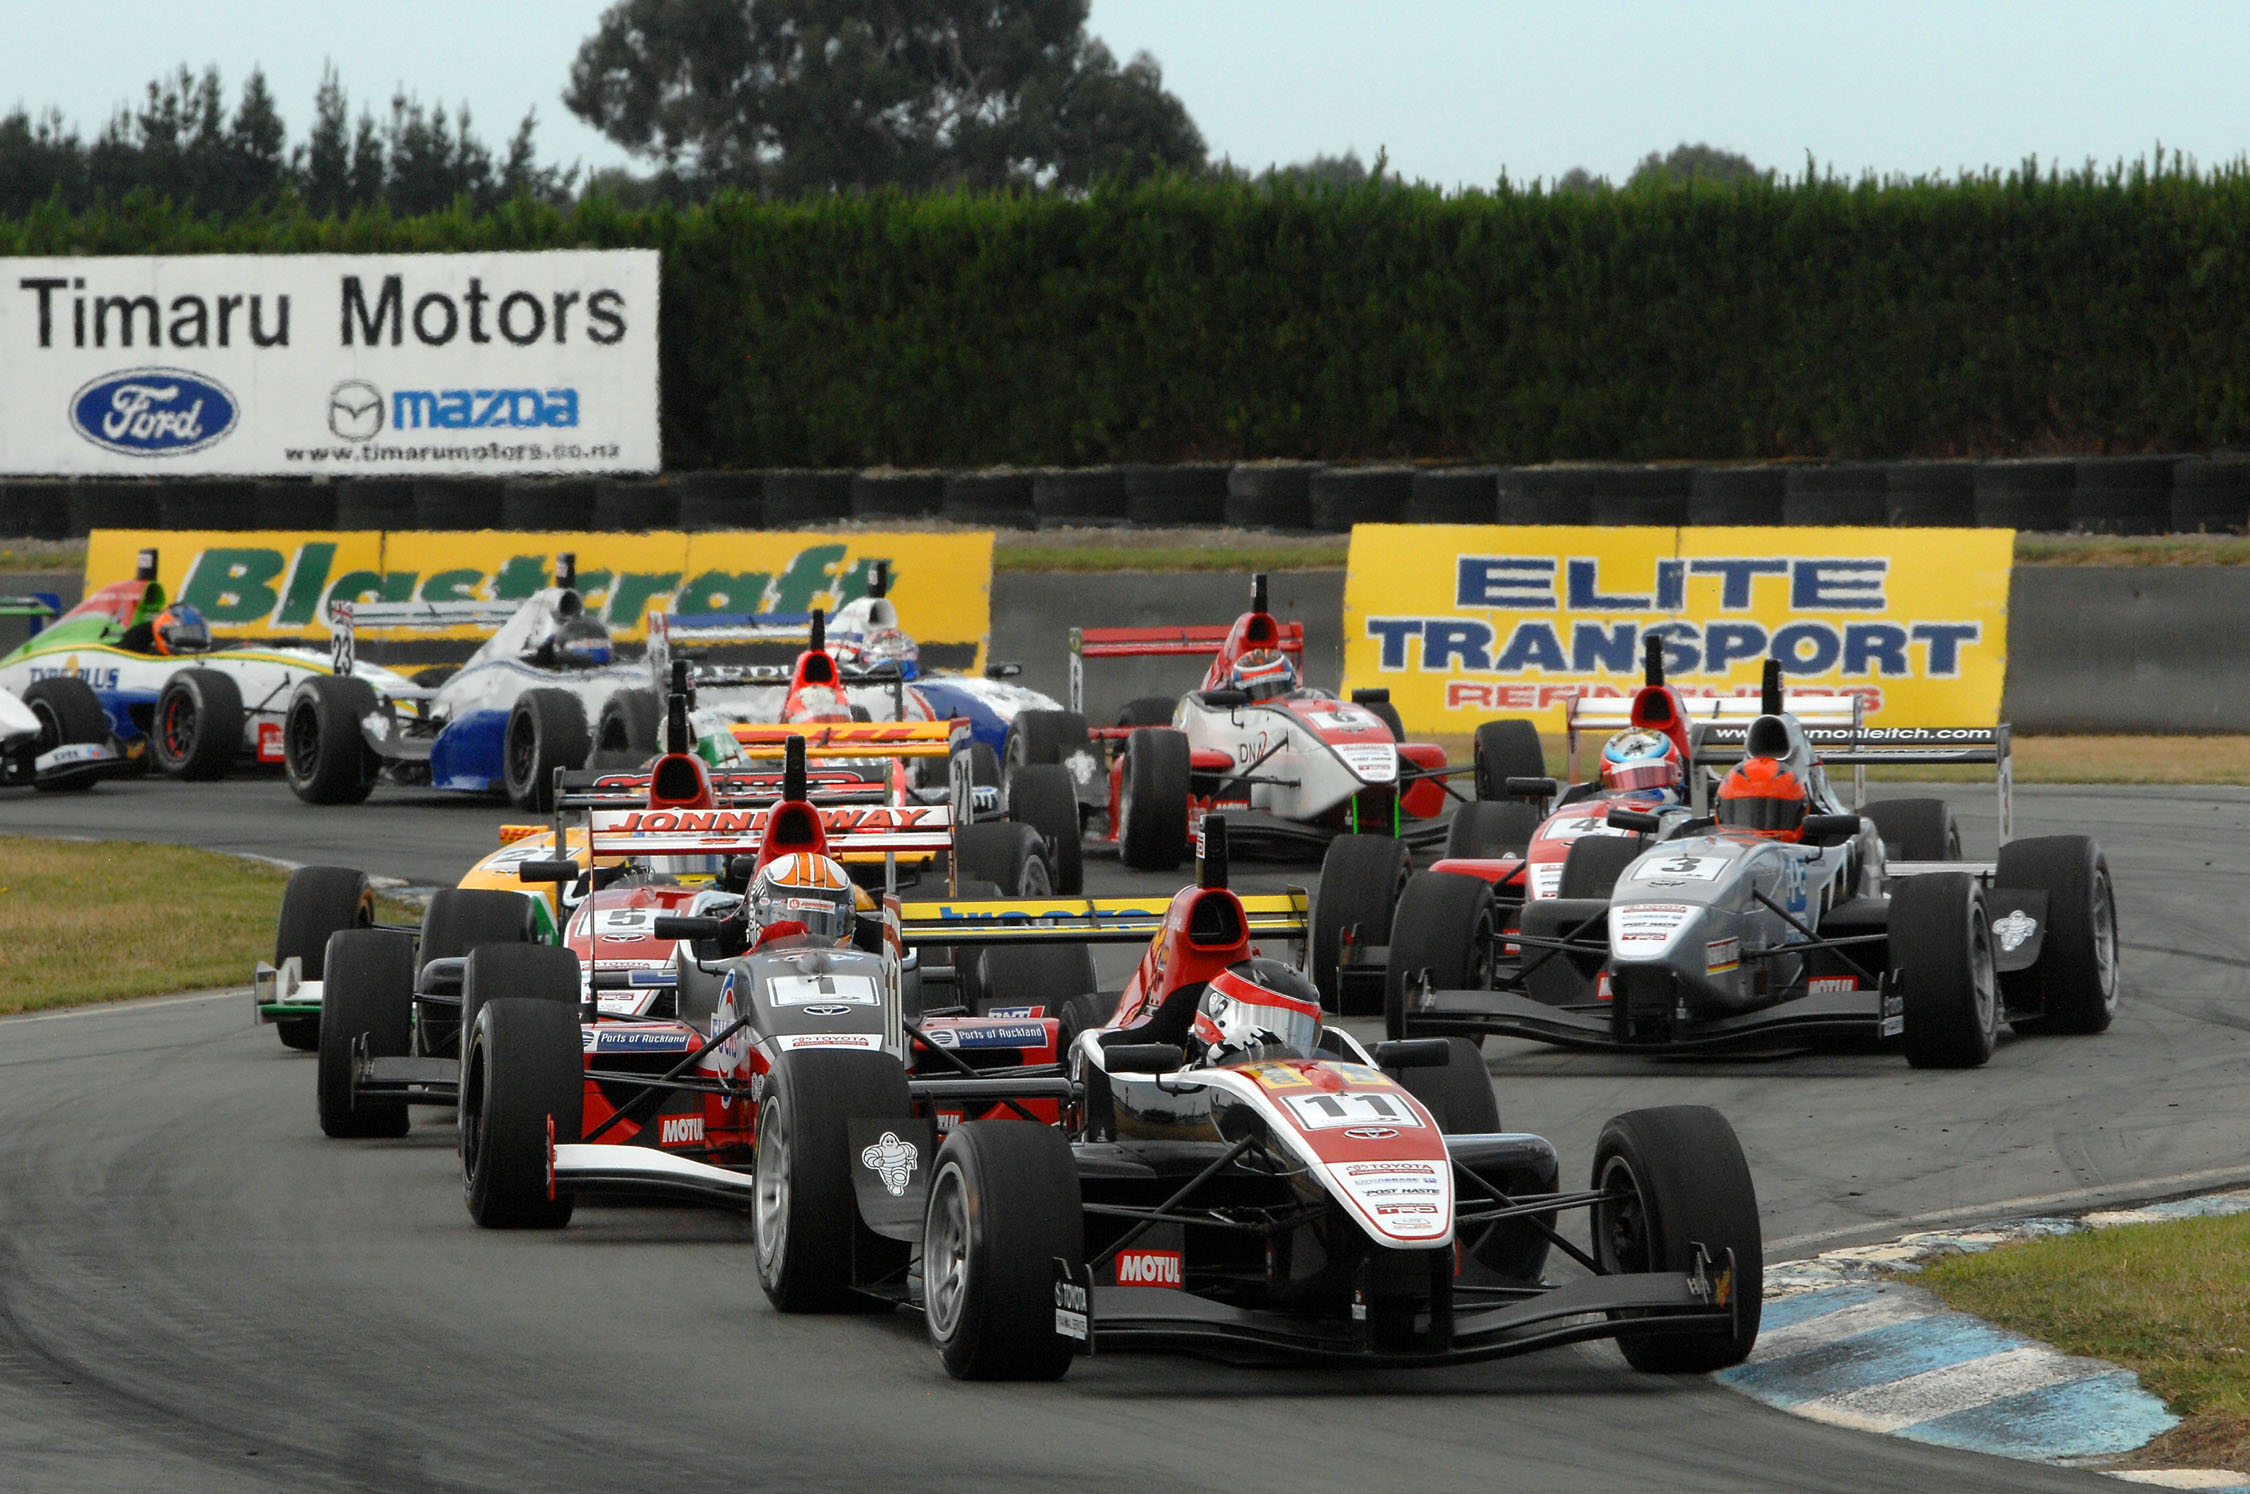 TRS paves way for European F3 grid